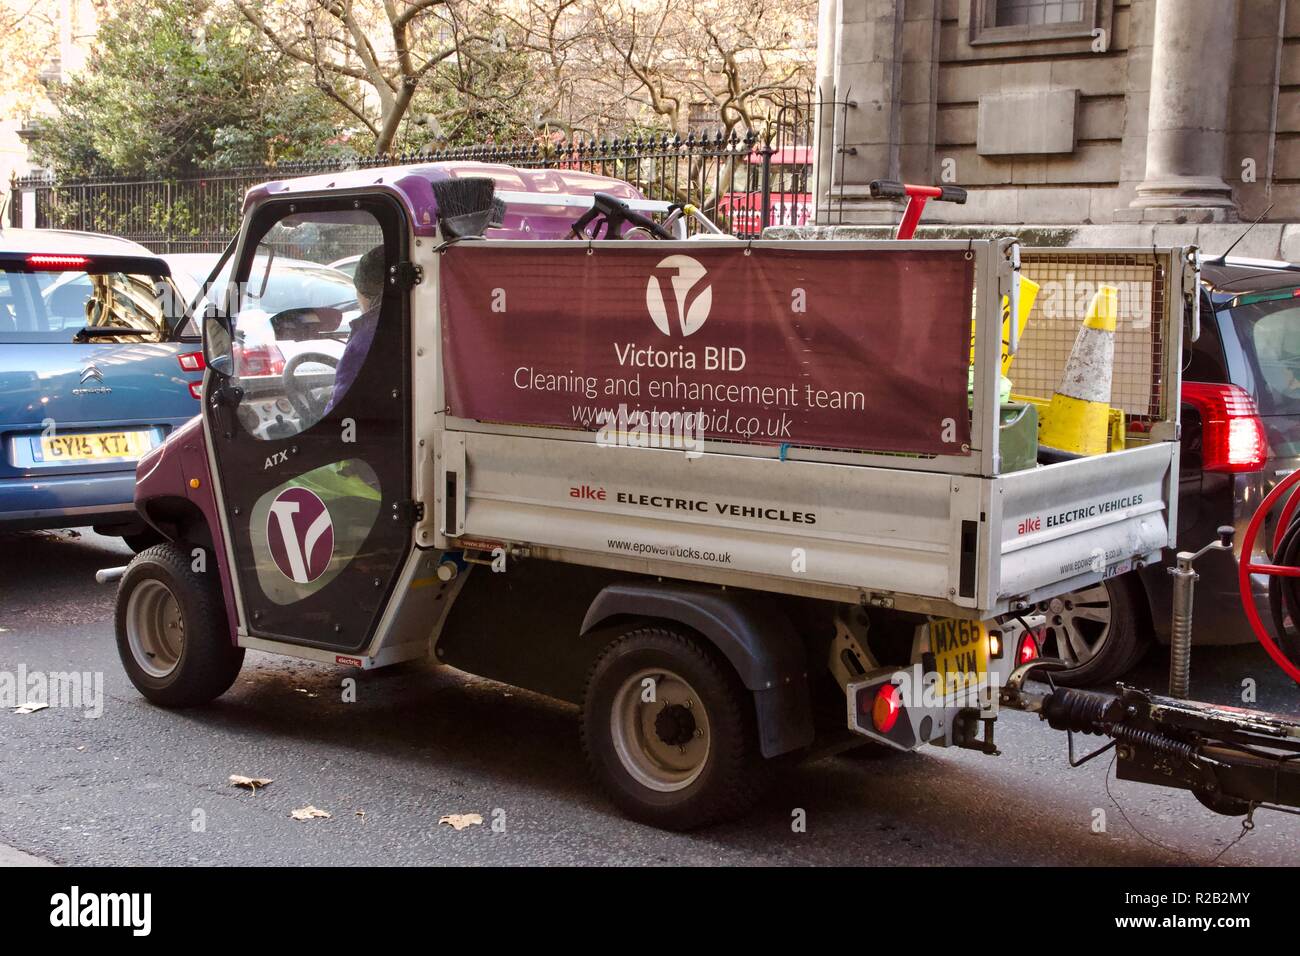 Victoria BID Alke Electric Vehicle which has zero emissions and is environmentally friendly Stock Photo